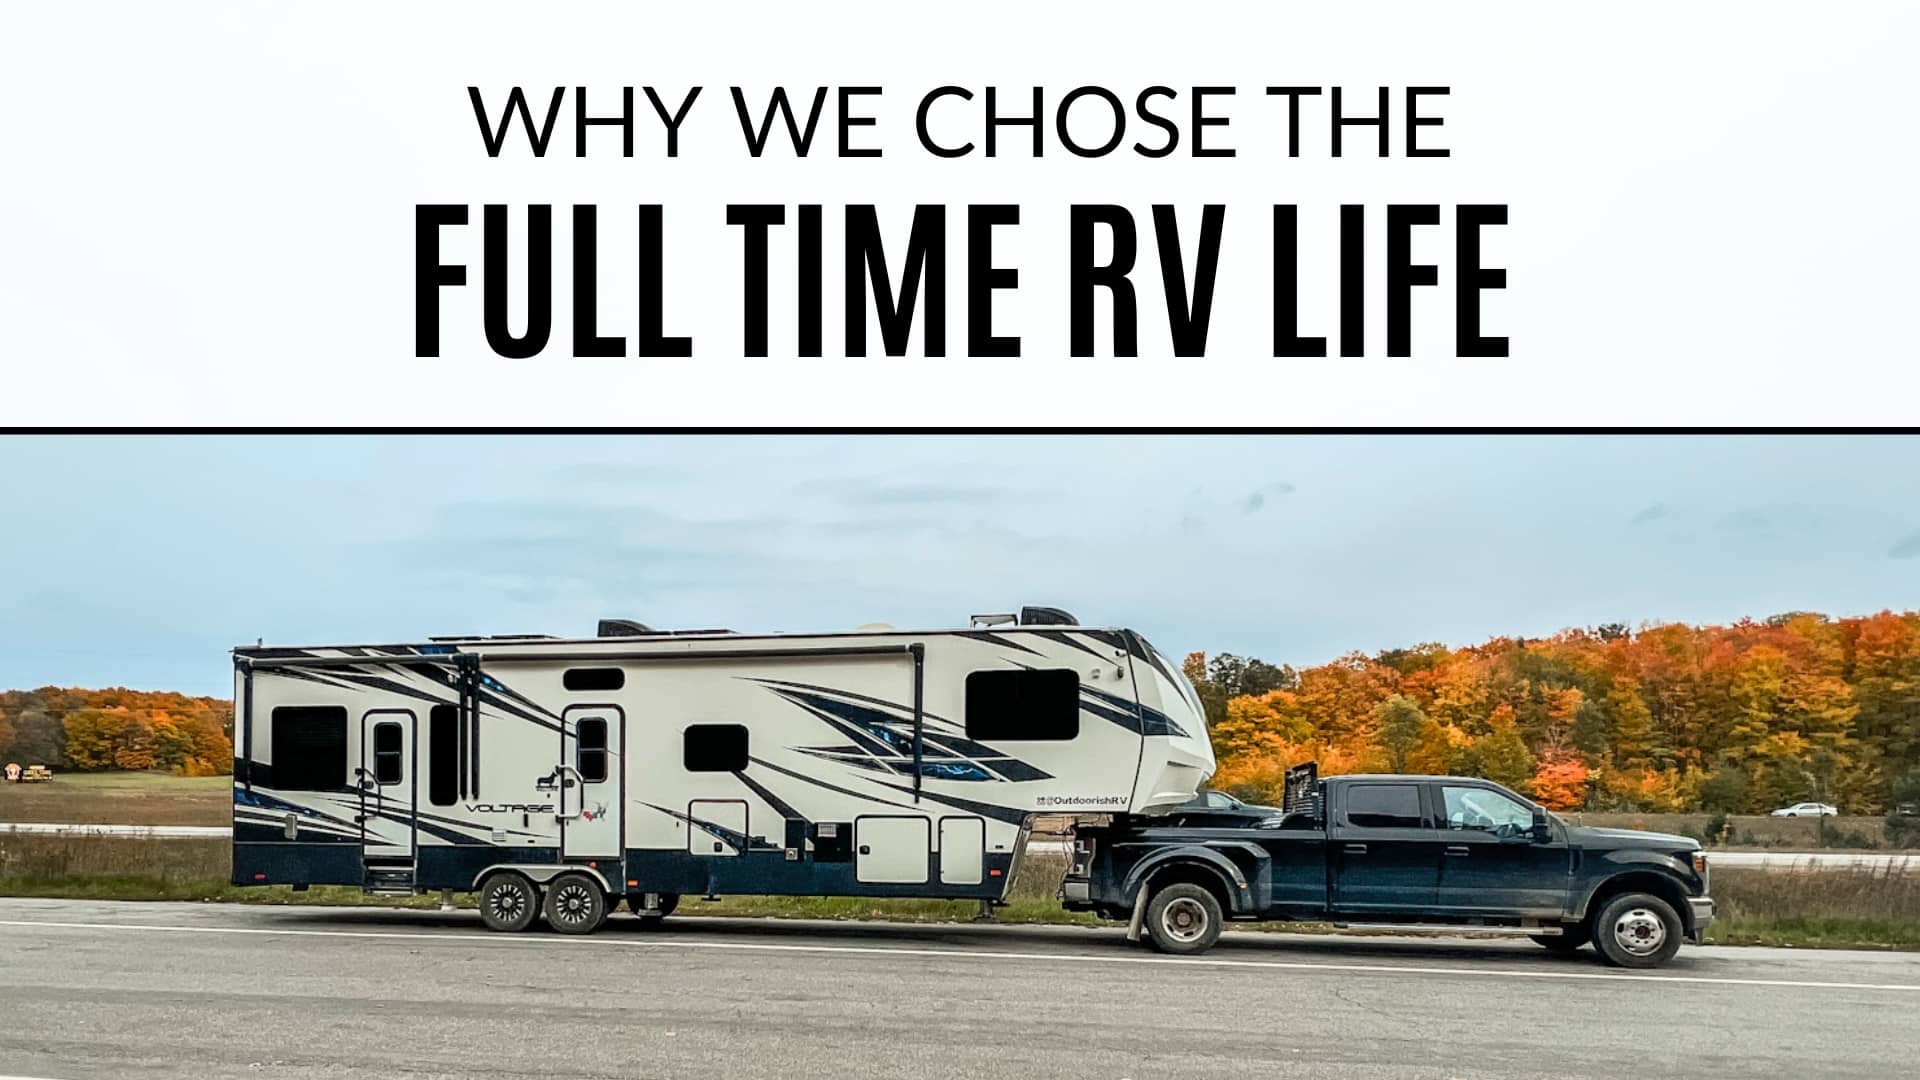 Black truck parked at rest stop towing a white fifth wheel. Highway in background with fall foliage on trees. Text on the image says "Why we chose the full time RV life"